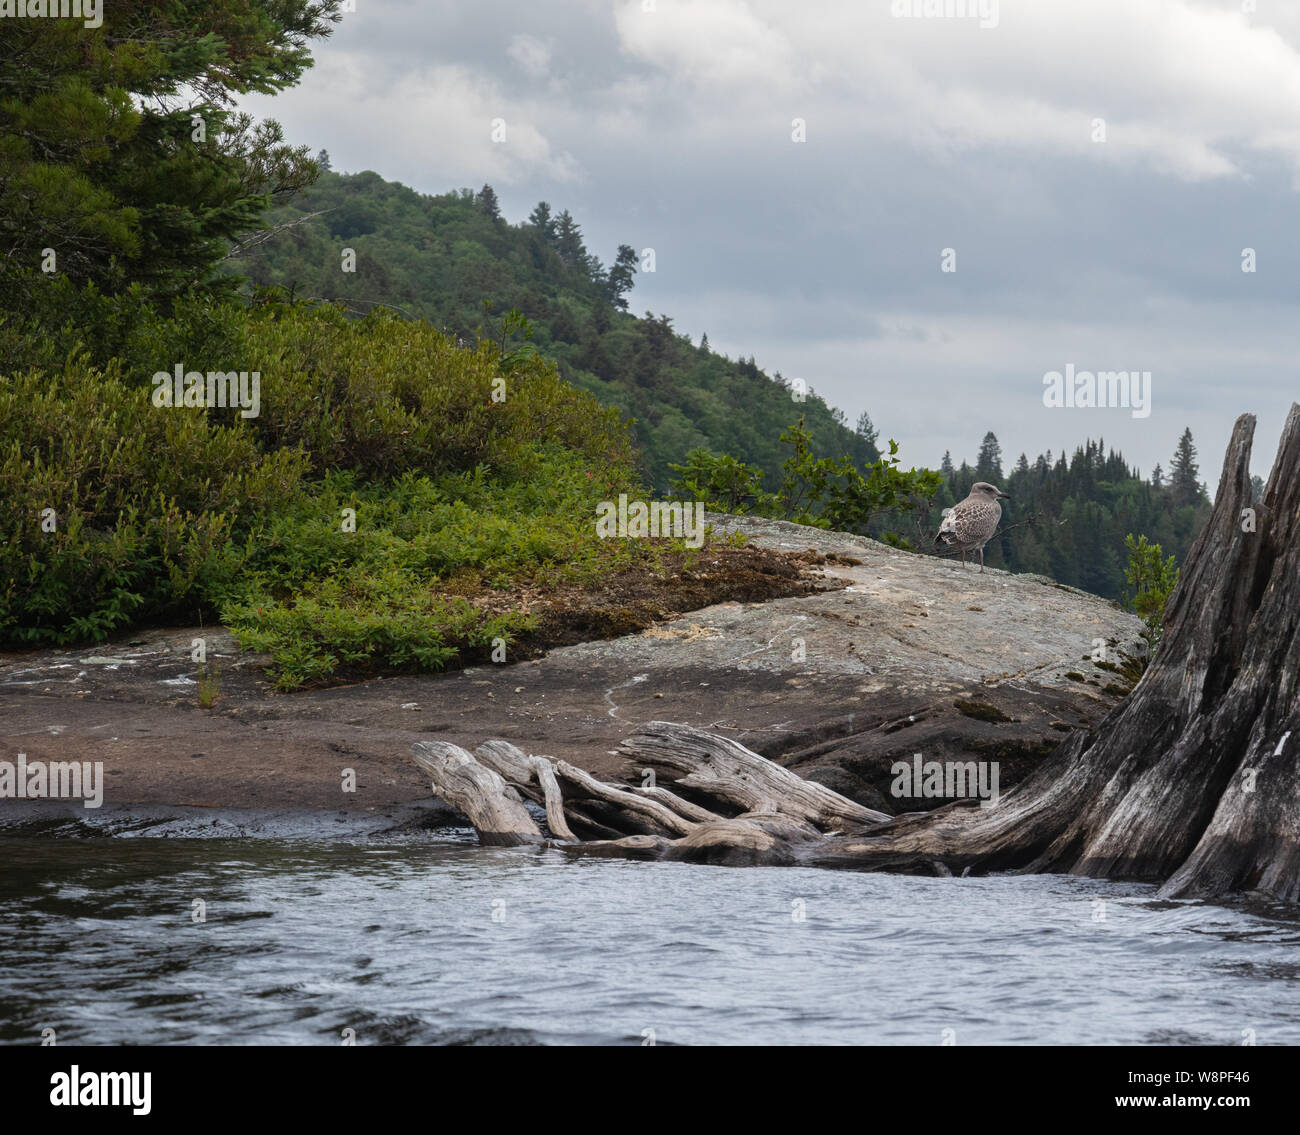 Canadian Shield rock forms a river bank in Muskoka wilderness Stock Photo